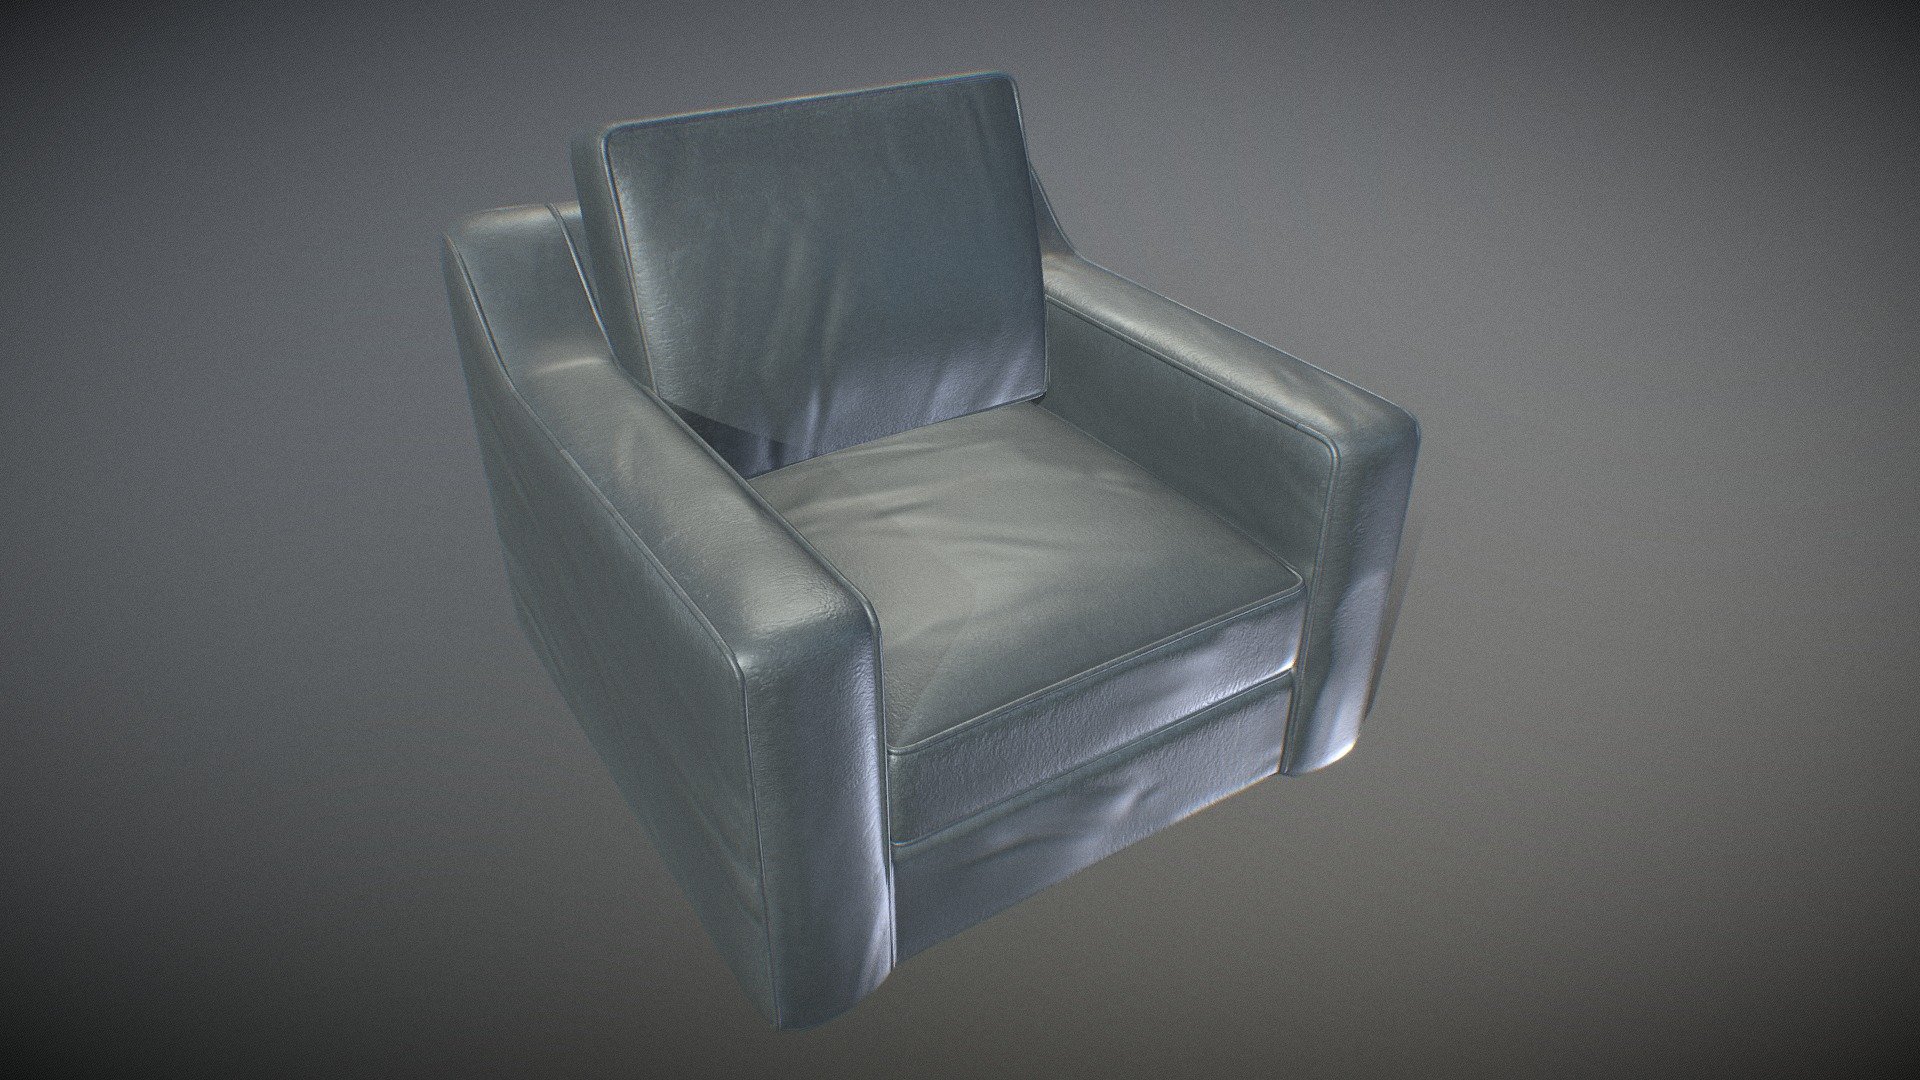 Sofa- 3d model ready for VirtualReality(VR),Augmented Reality(AR),games and other render engines.This lowpoly 3d model of Sofa is equipped with 4k resolution textures.The PBR_Maps includes- Diffuse,roughness,metallic,normal 3d model